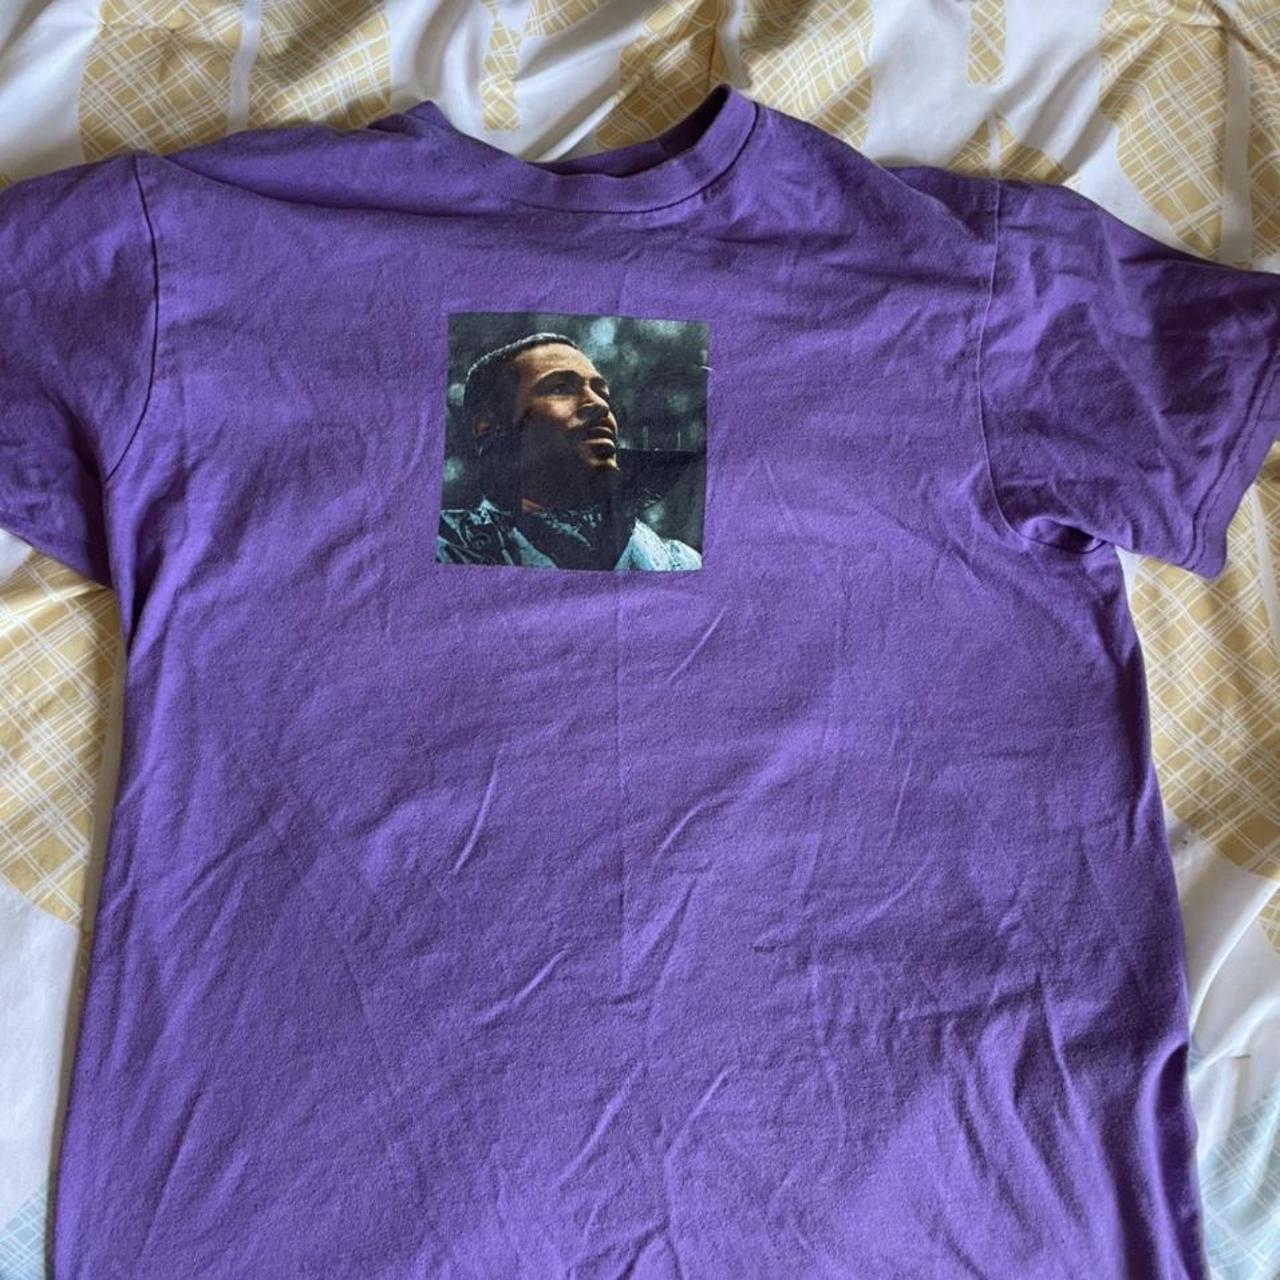 marvin gaye supreme tee, been worn a bit, size m...